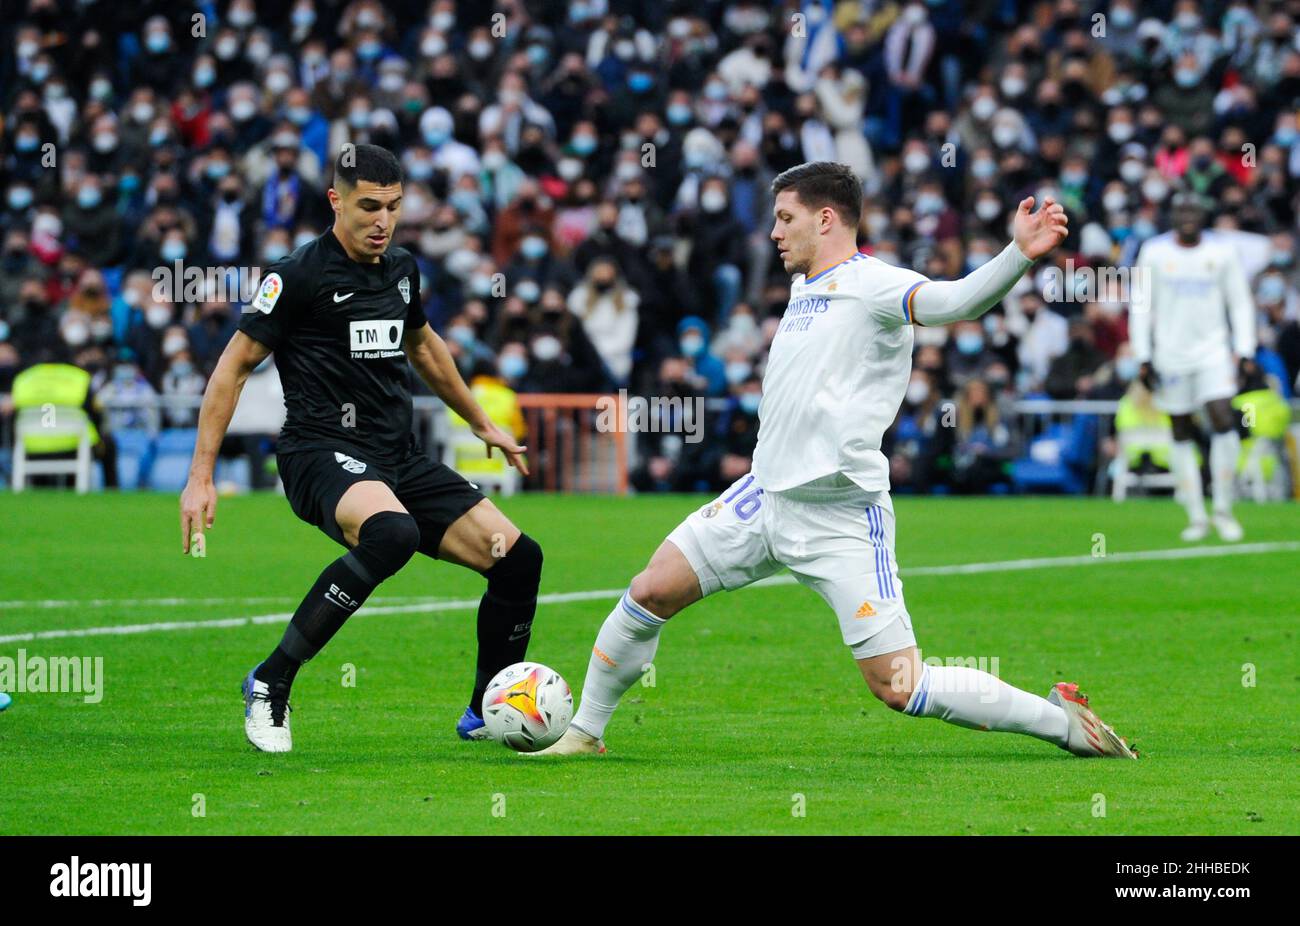 Madrid, Spain. 23rd Jan, 2022. Real Madrid's Luka Jovic (R) vies with Elche's Diego Gonzalez during a Spanish first division league football match between Real Madrid and Elche CF in Madrid, Spain, Jan. 23, 2022. Credit: Gustavo Valiente/Xinhua/Alamy Live News Stock Photo